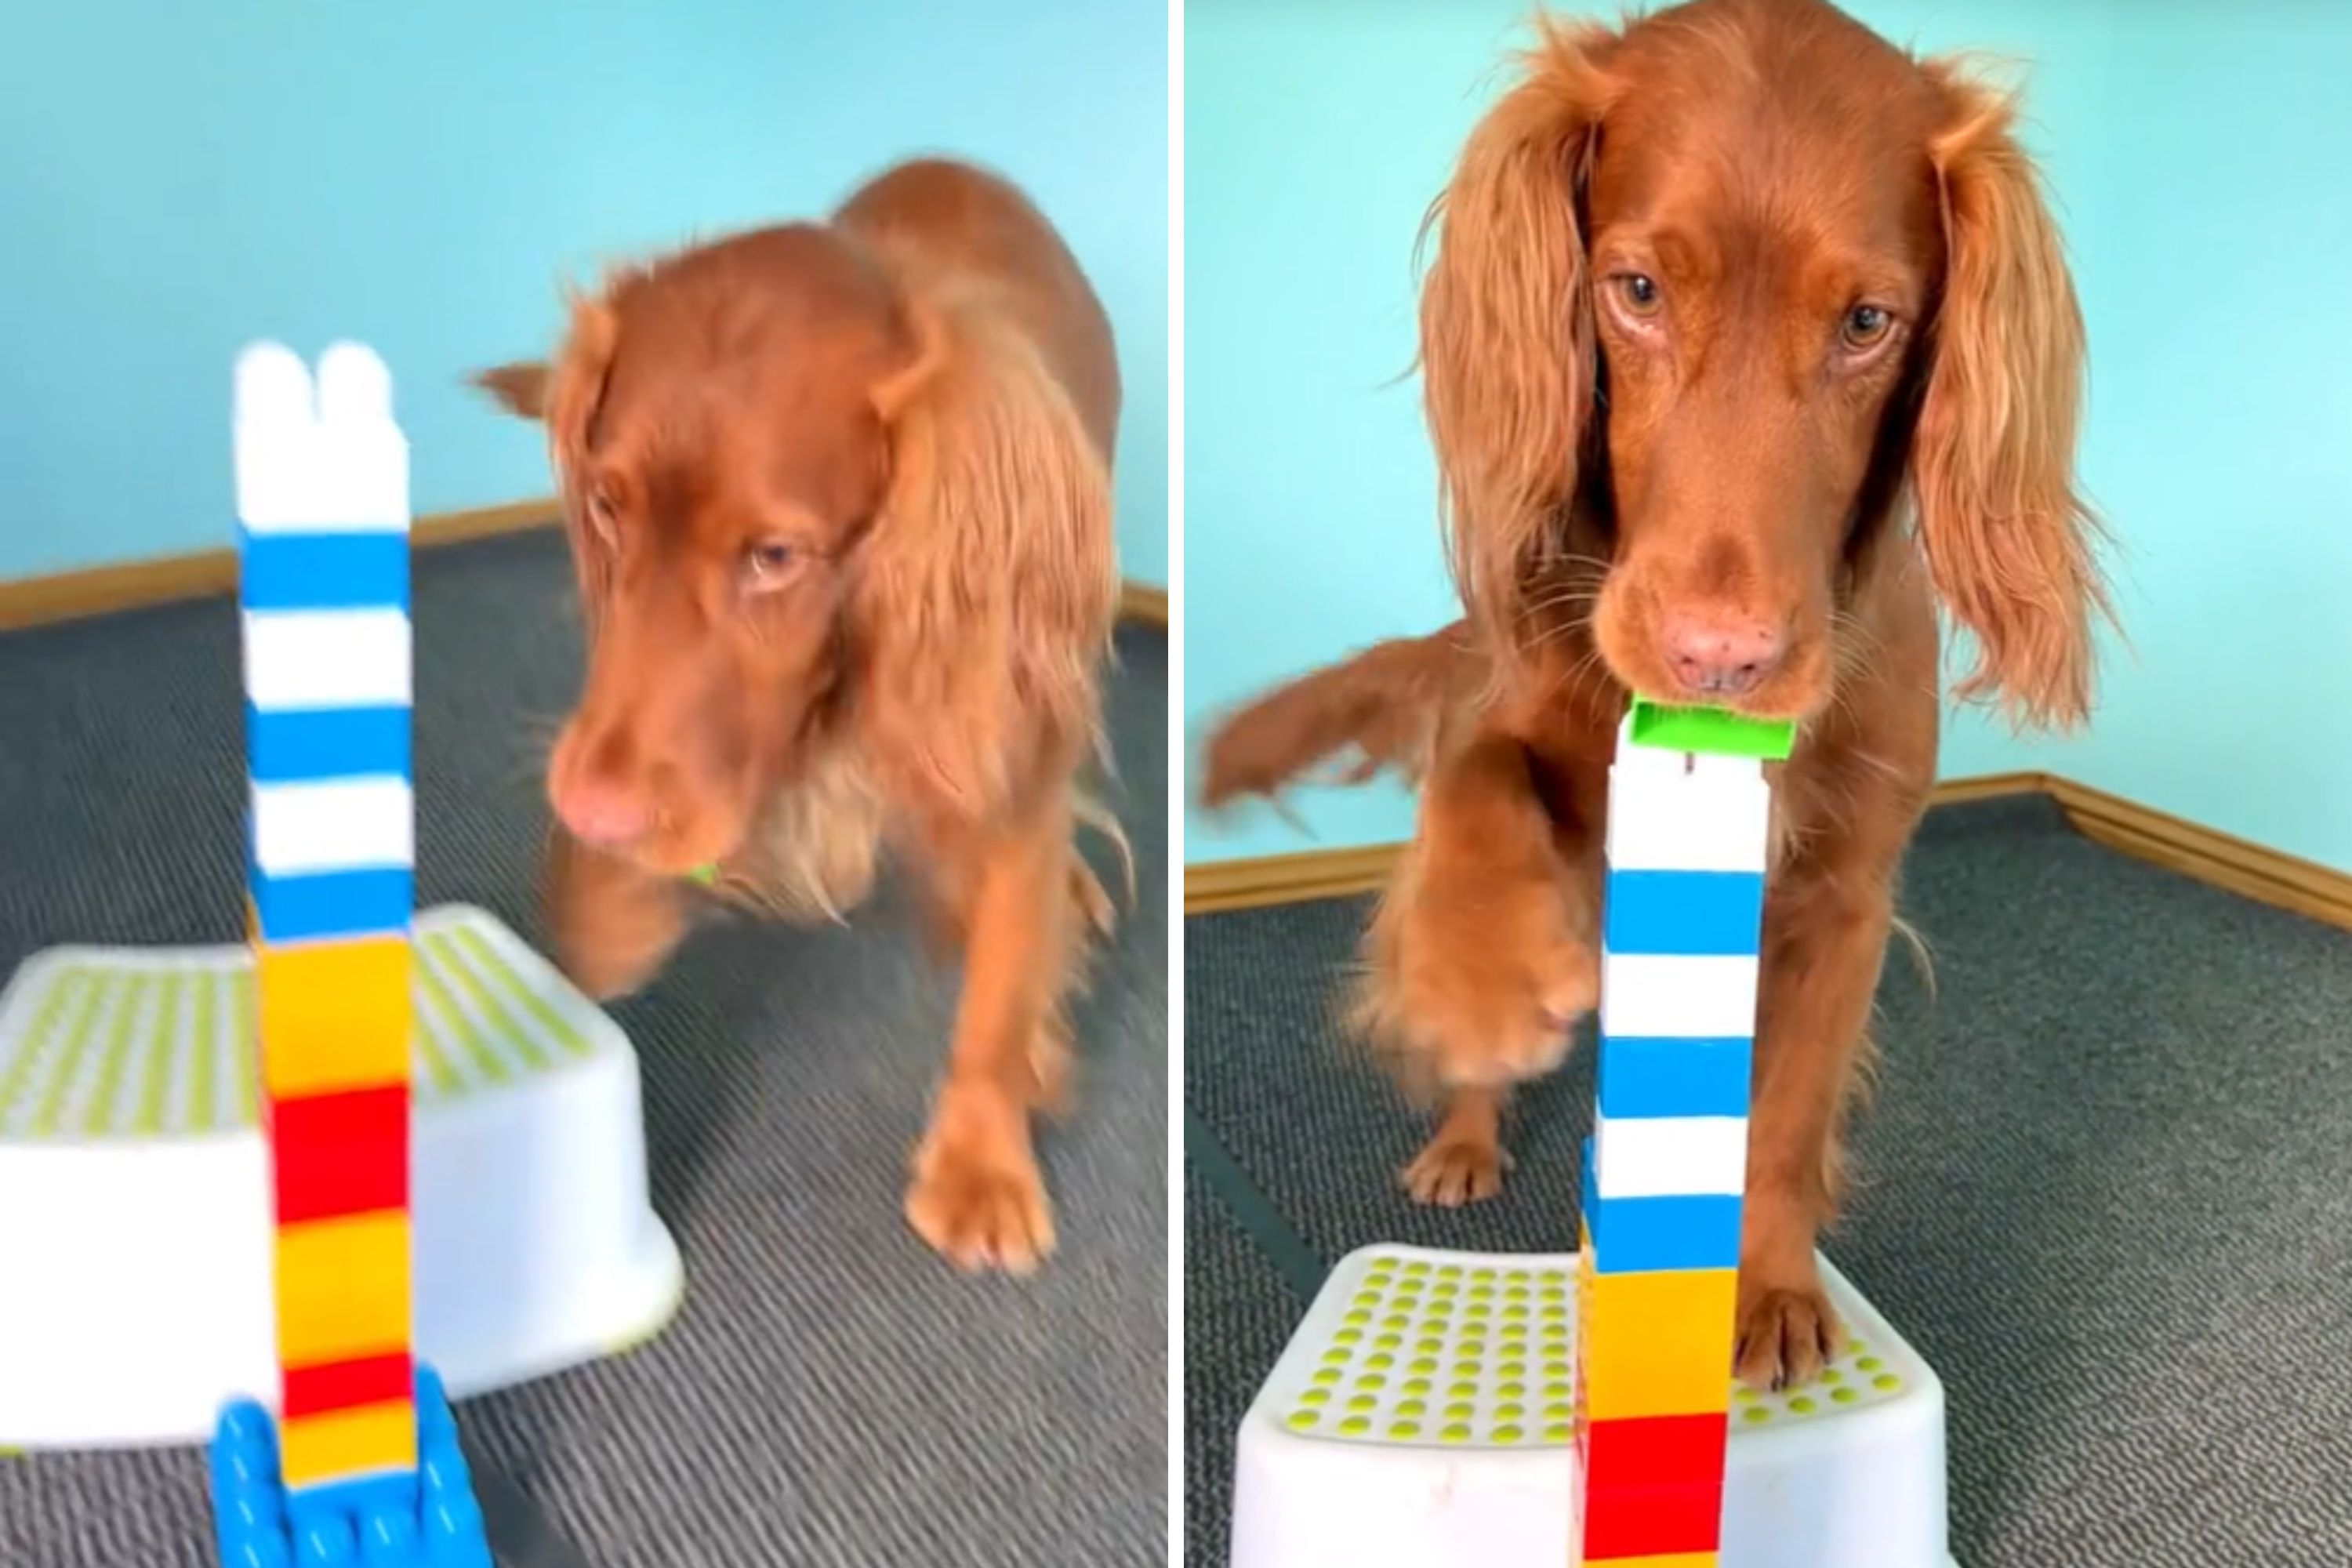 Dog who holds Guinness World Record blows internet away with new trick